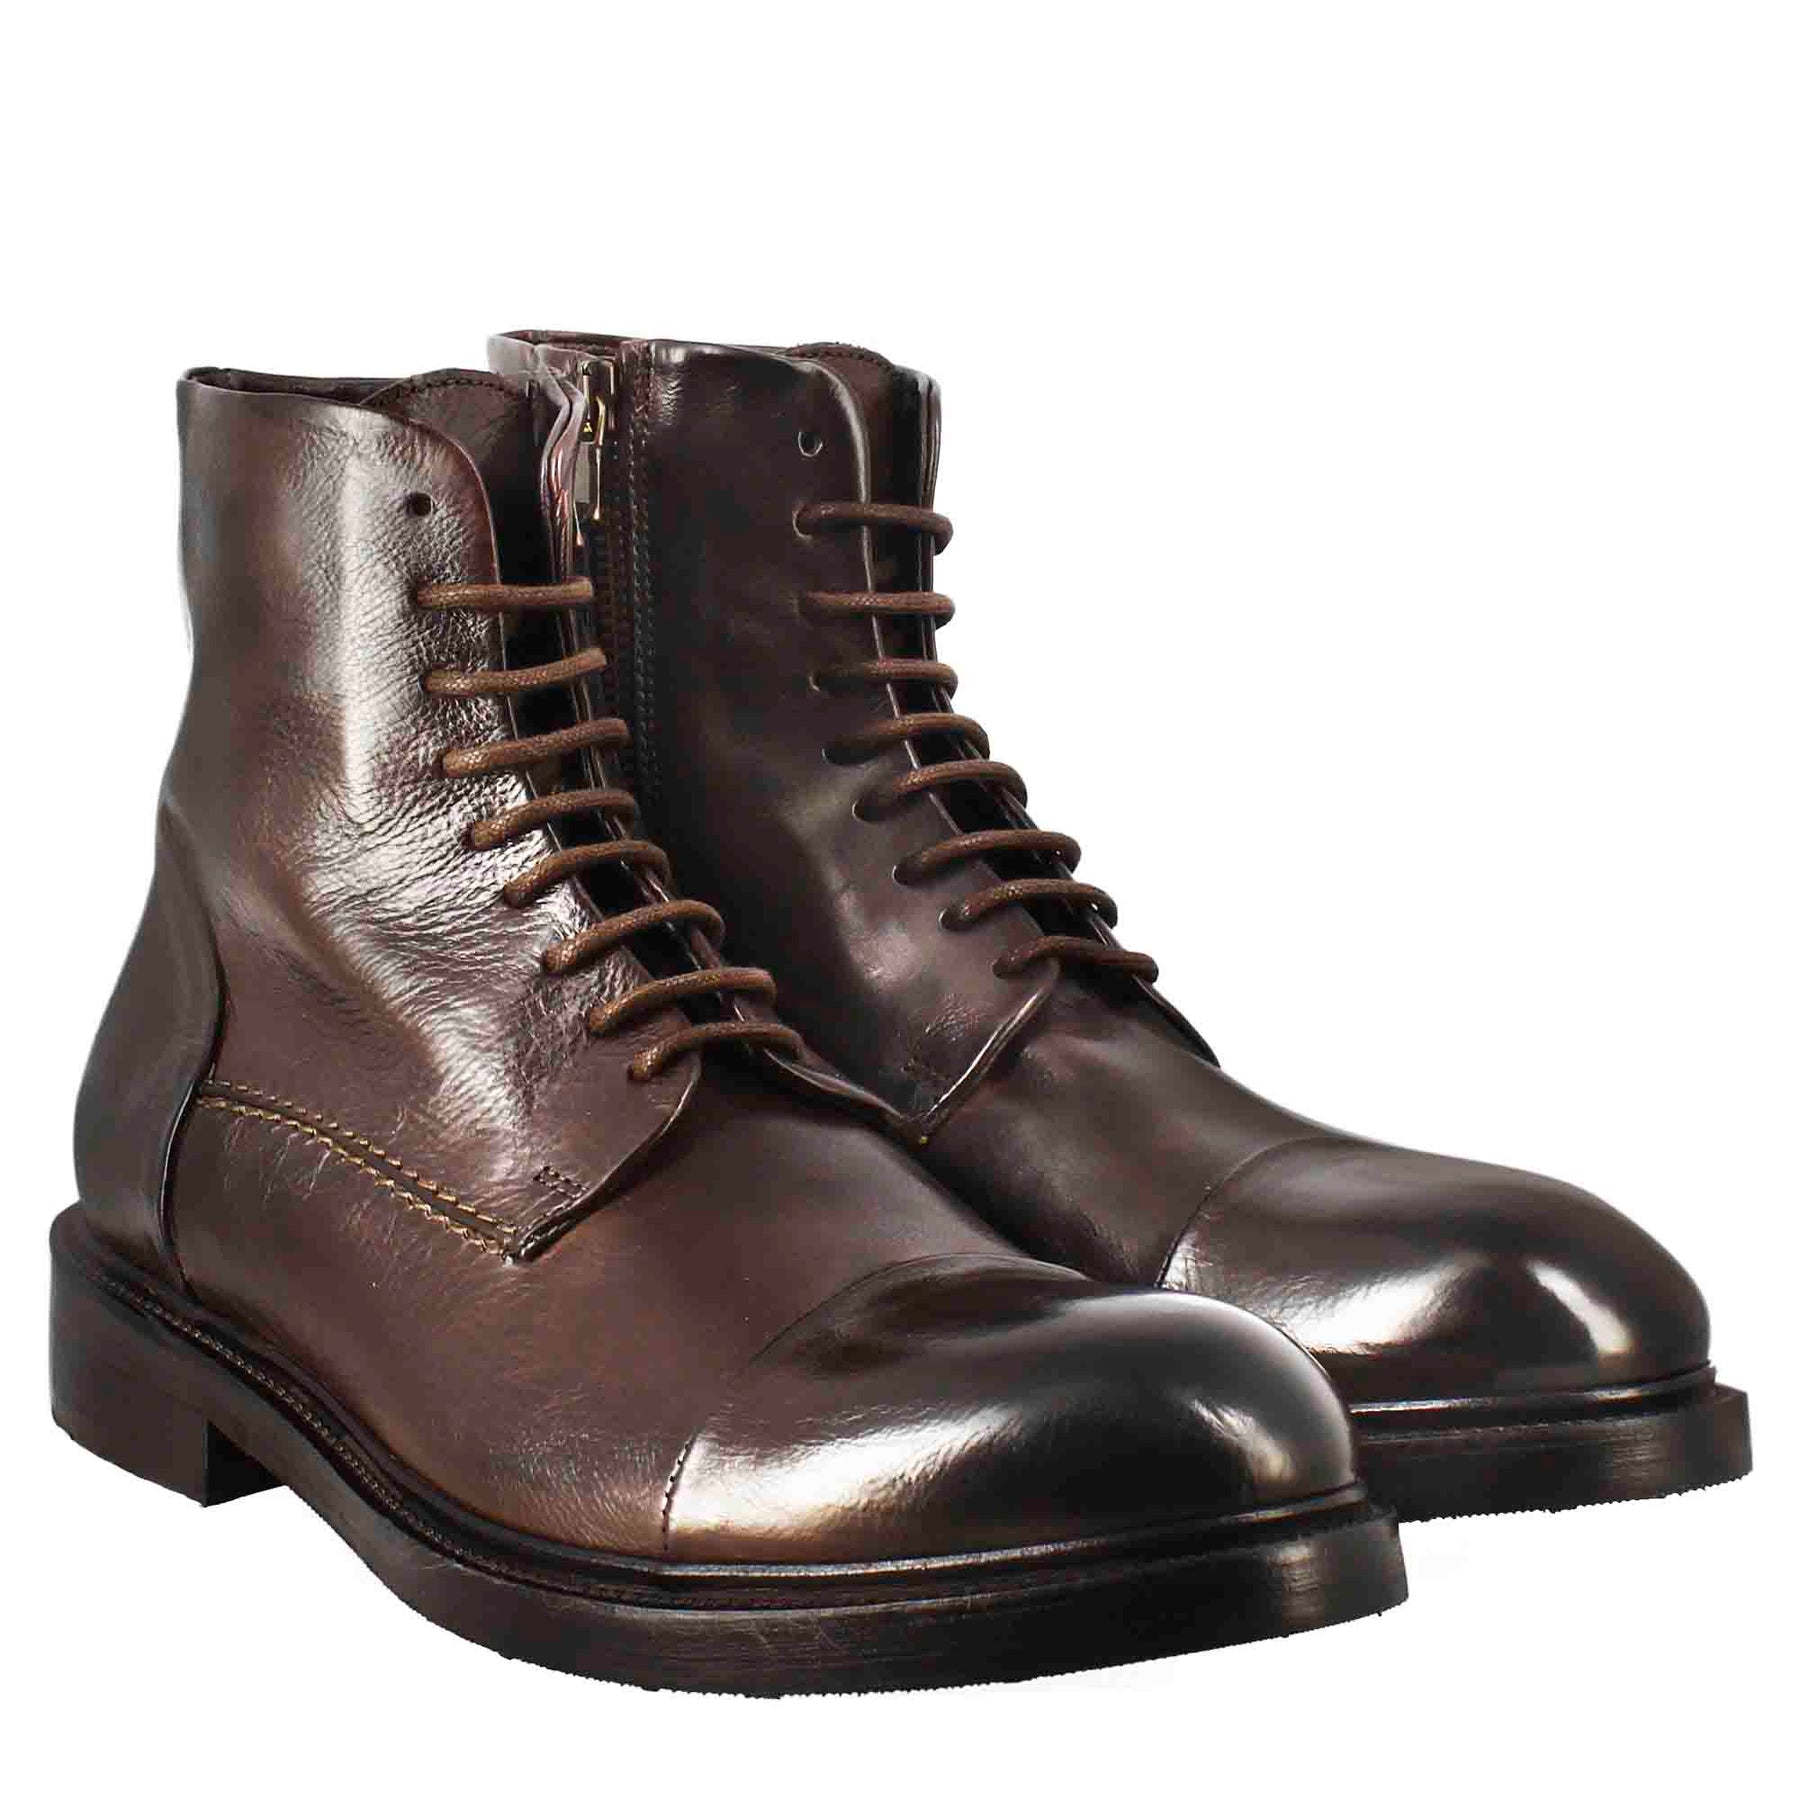 Men's high diver amphibian boot in washed leather in dark brown